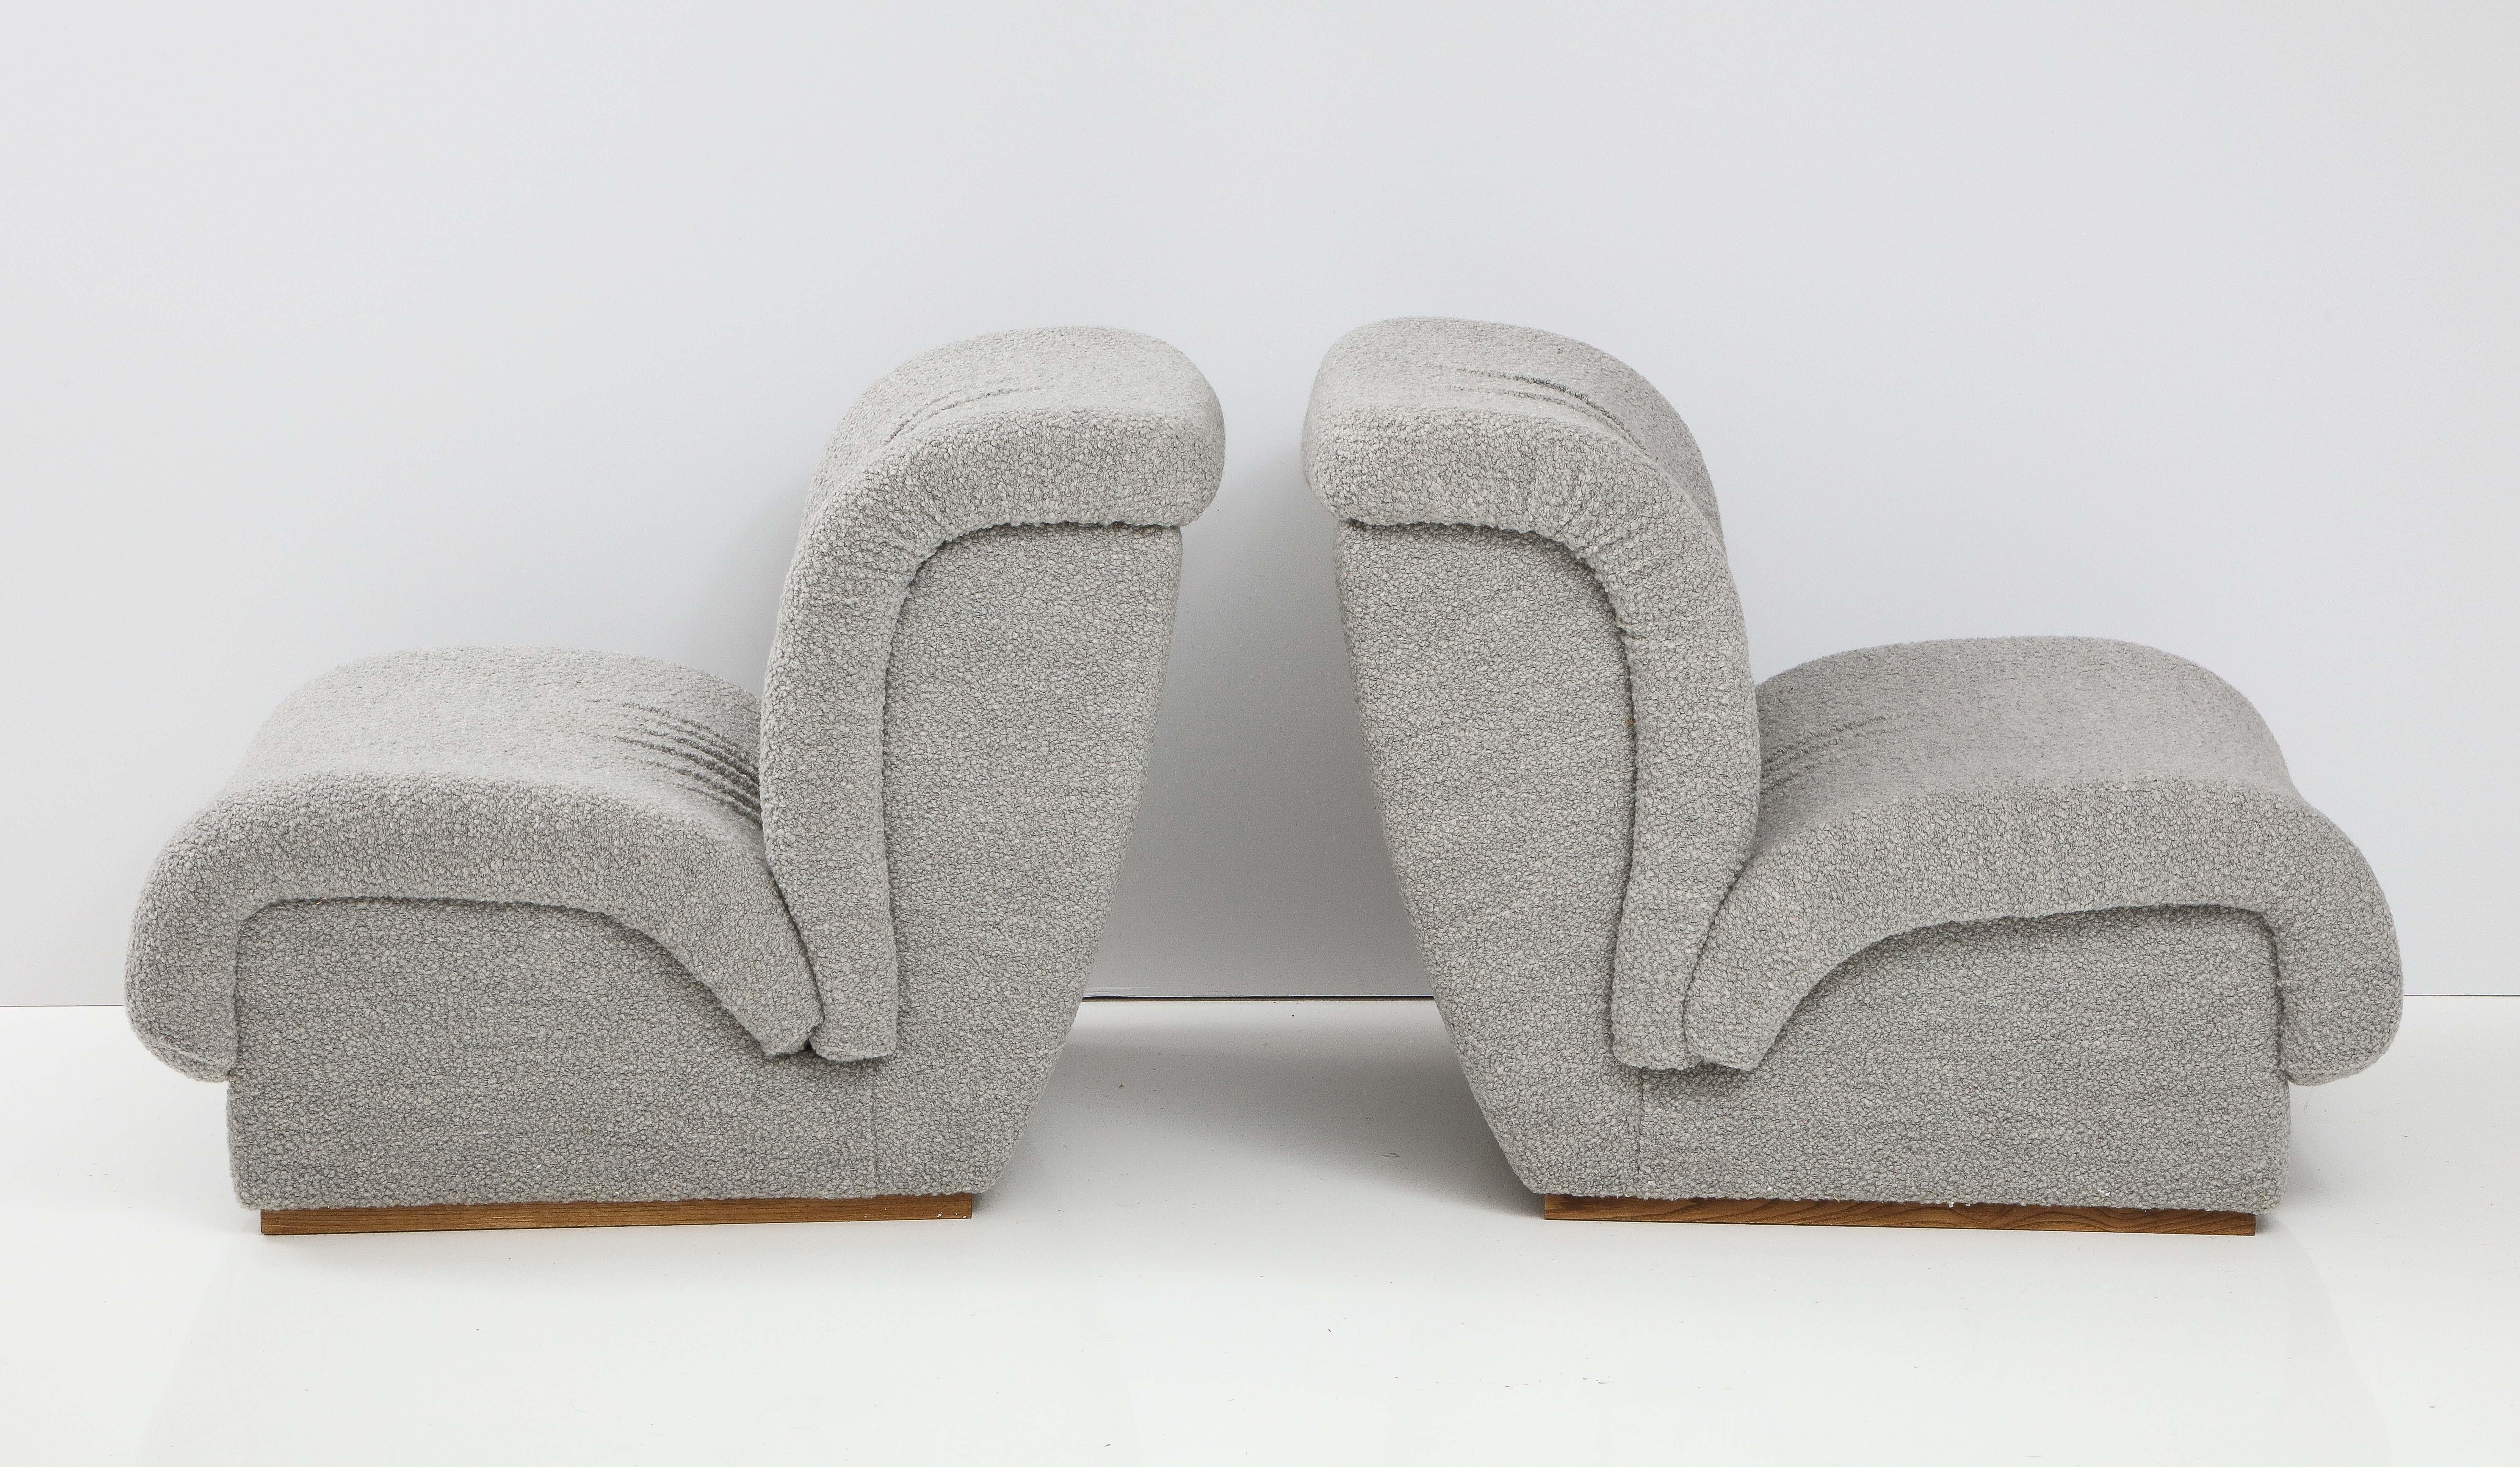 Bouclé Pair of Slipper Lounge Chairs in Grey Boucle by Doimo Salotti, Italy, circa 1970 For Sale